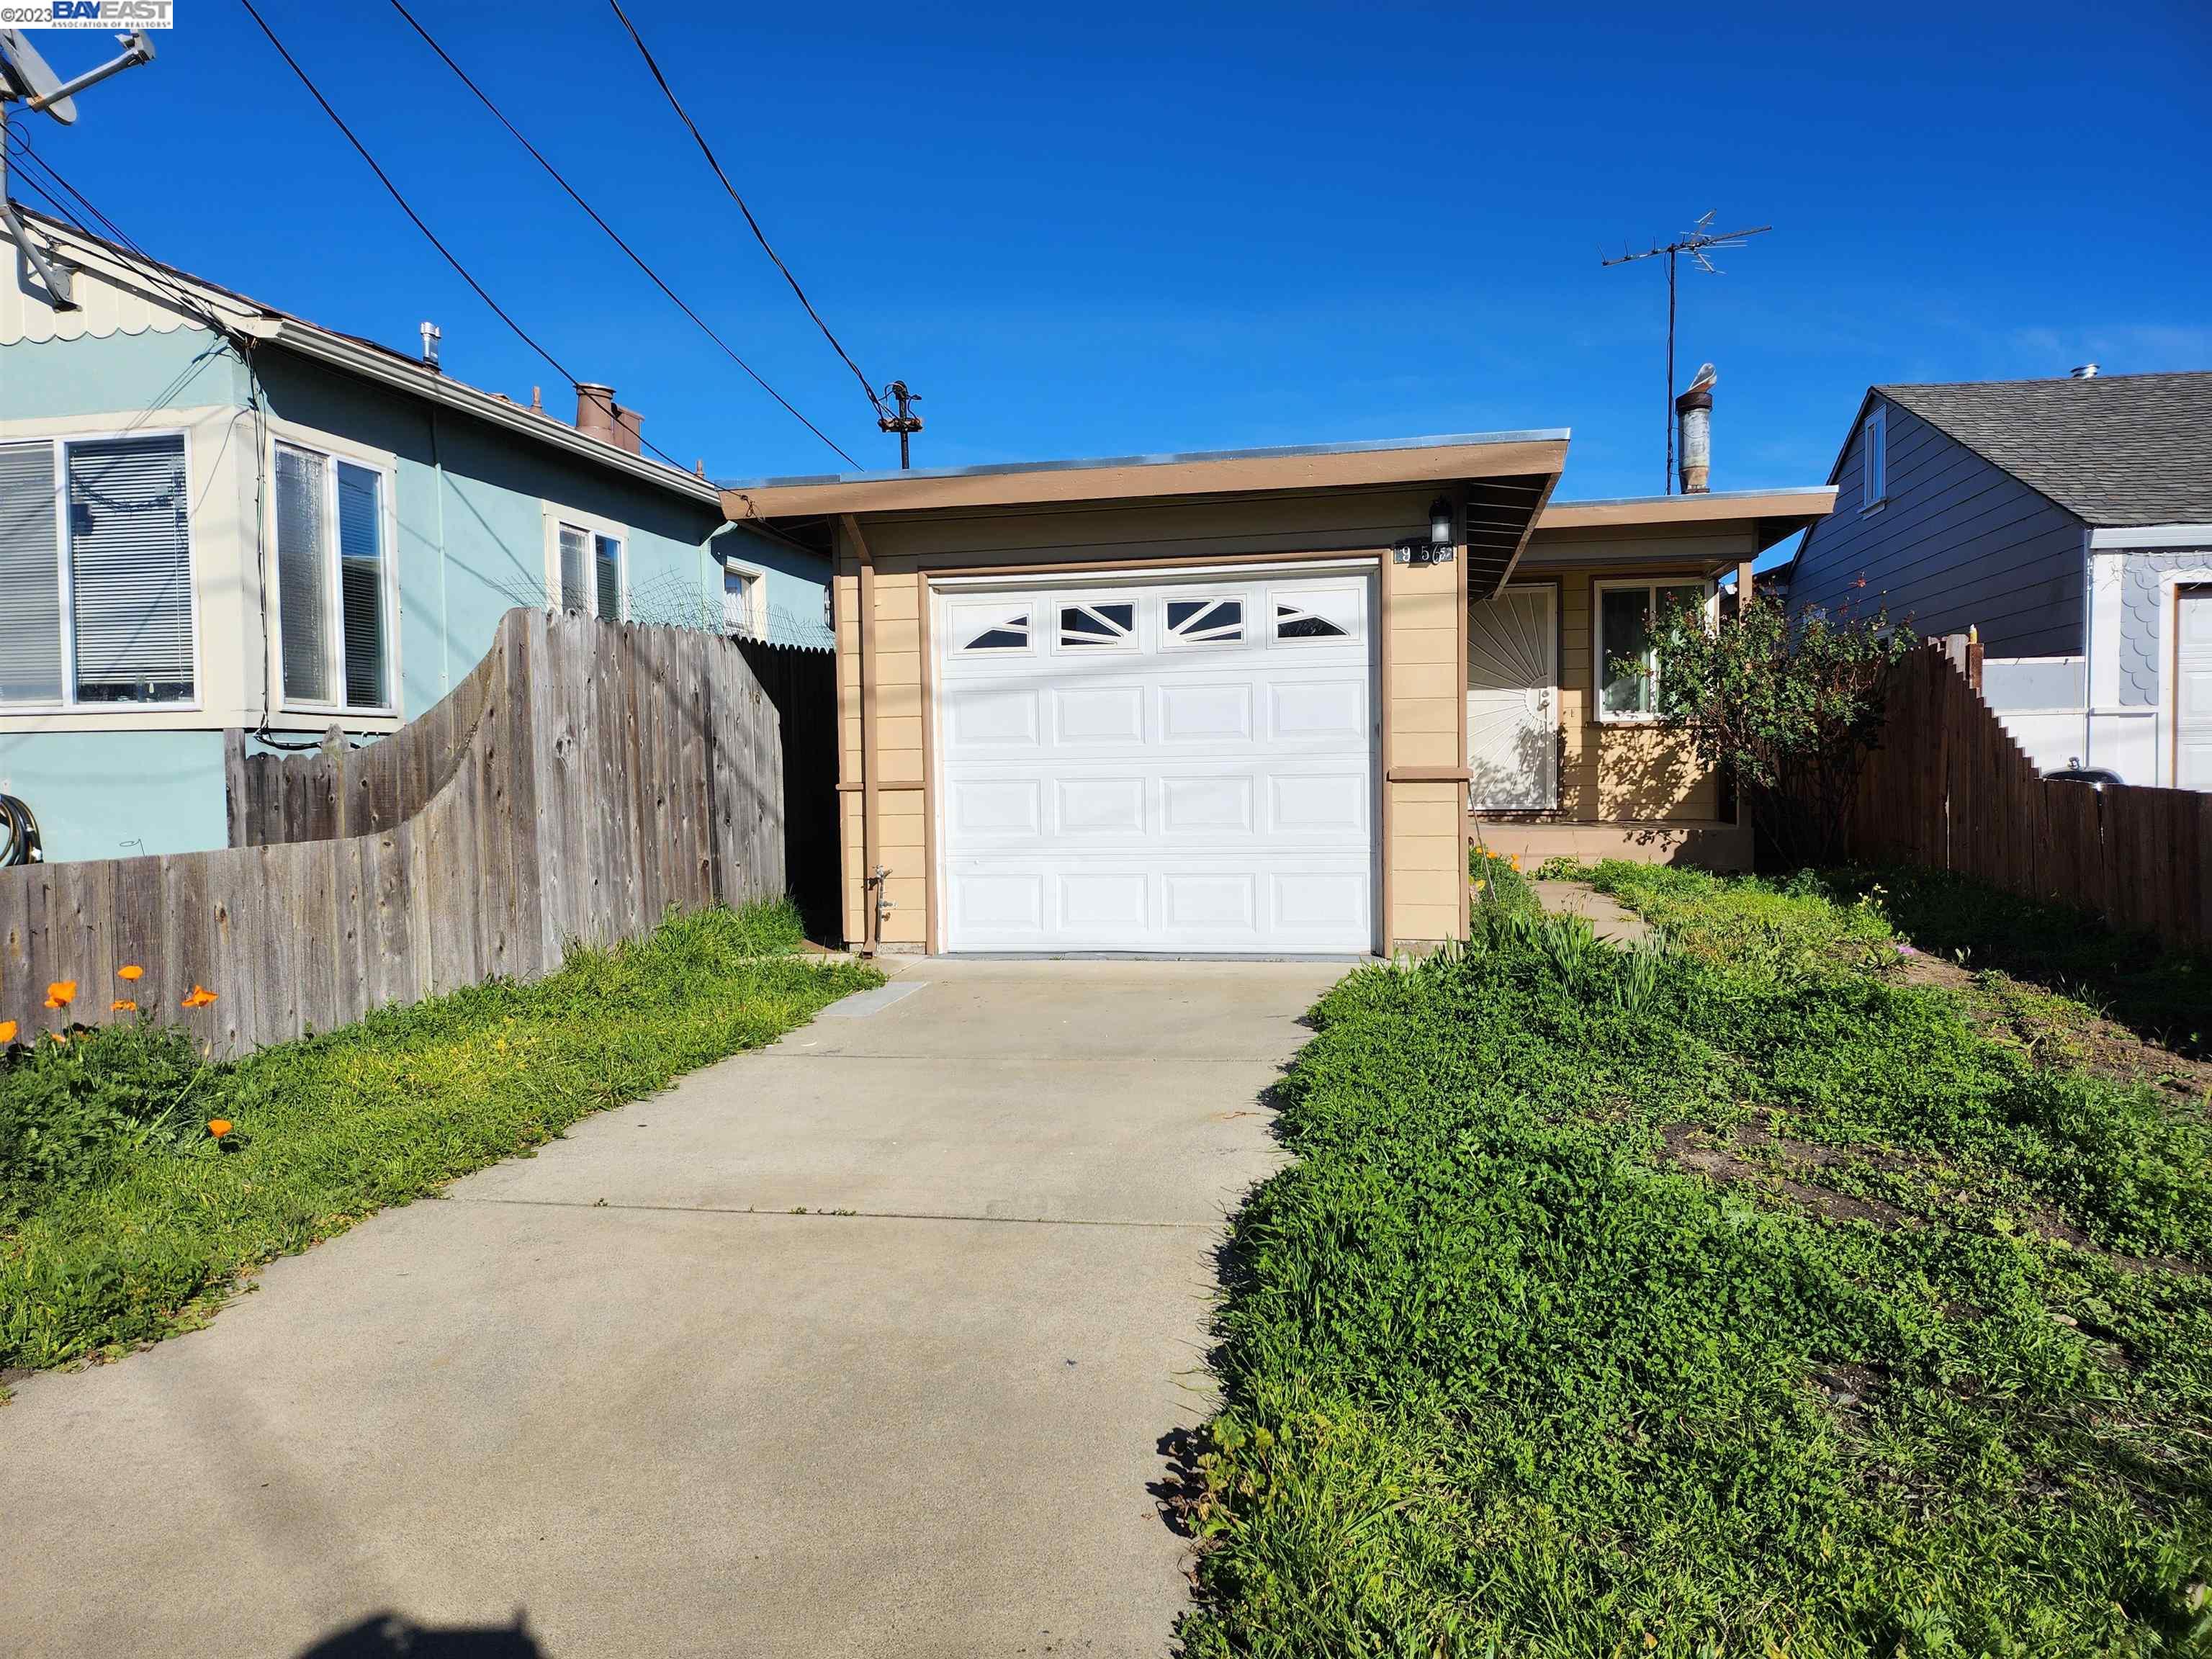 Welcome to this sweet 2 bedrooms/1 bath bungalow located on a quiet street and desired neighborhood at 956 Wilson Ave in Richmond Annex. Great location with easy access to freeways, several minutes away from Richmond and EL Cerrito Del North Bart stations, which provide convenient commute. Abundant dining and shopping options around the area. Granite countertop with stainless steel appliances. Refreshed interior paint, dual panel windows and wood flooring in living room and bedrooms. Good size private backyard with wooden fence awaits your imagination.